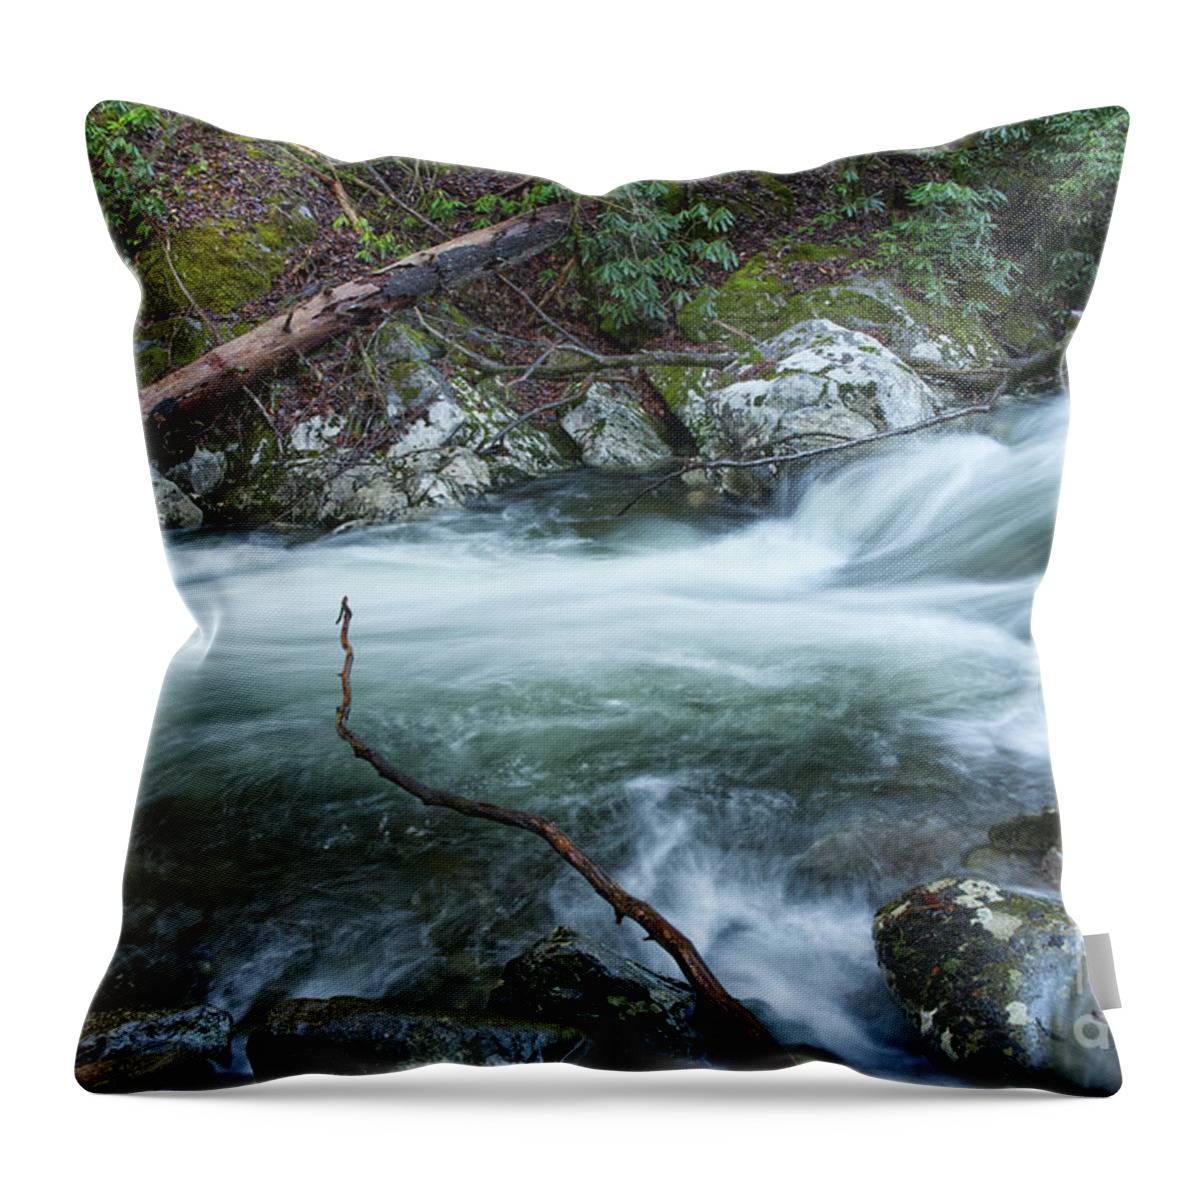 Middle Prong Little River Throw Pillow featuring the photograph Middle Prong Little River 51 by Phil Perkins